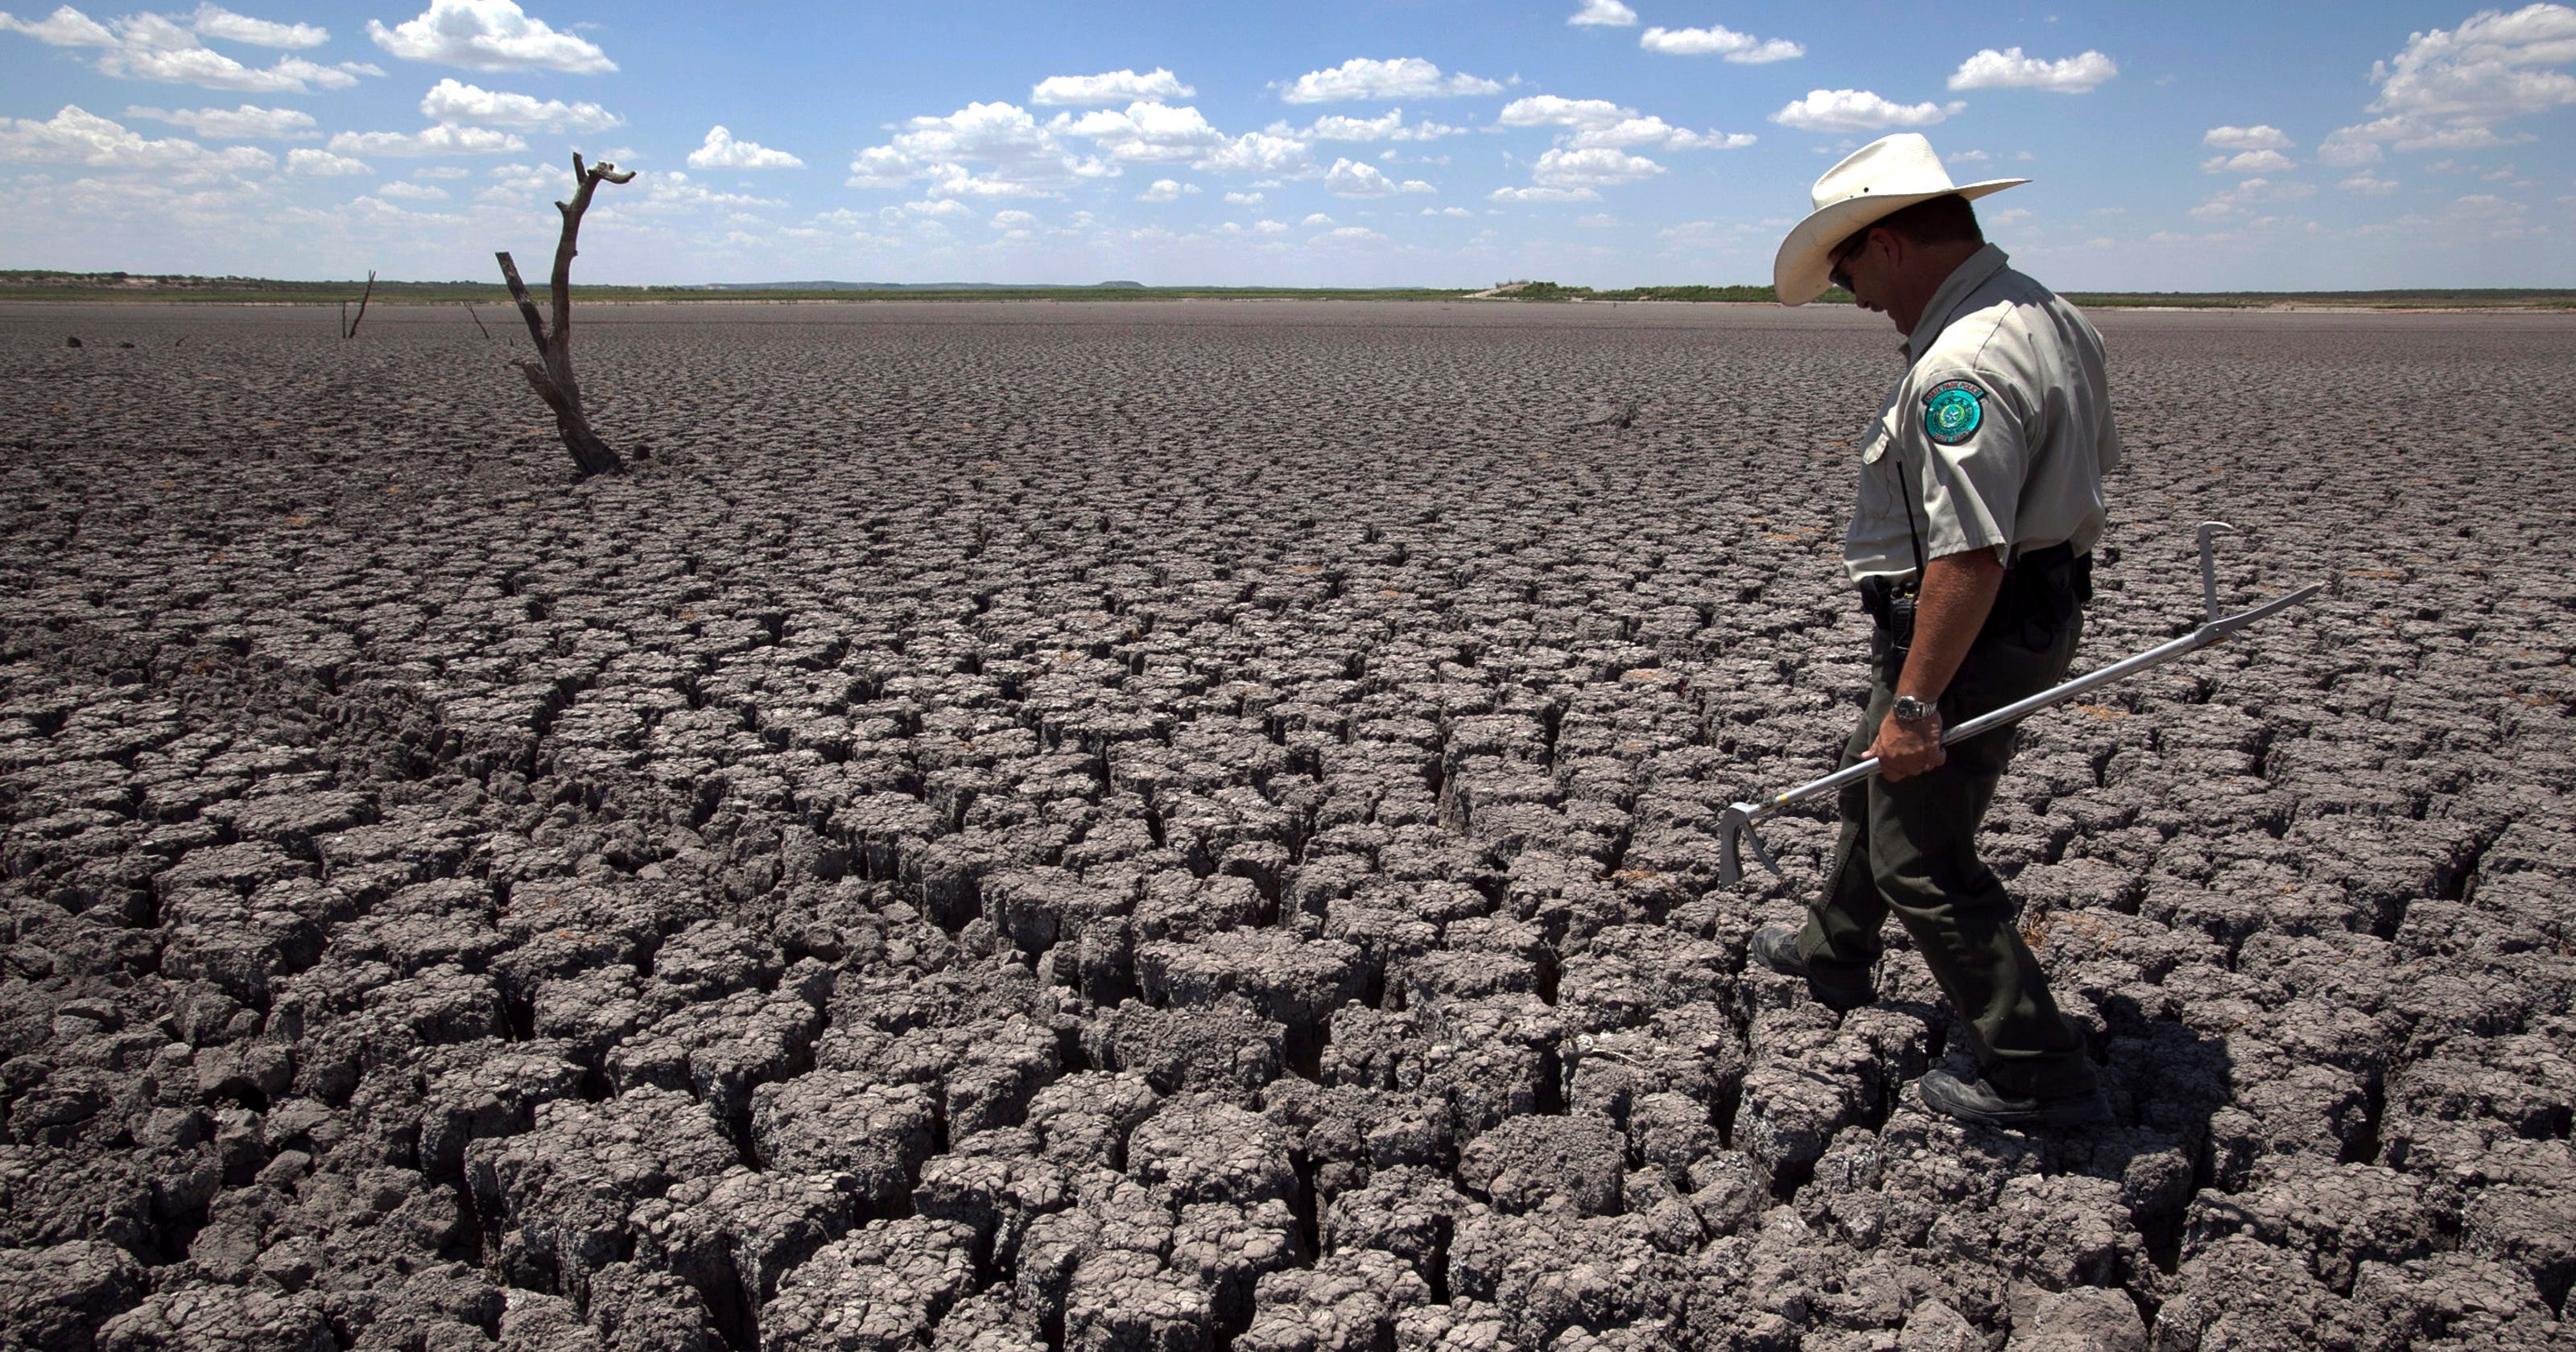 u-s-drought-reaches-record-low-as-rain-reigns